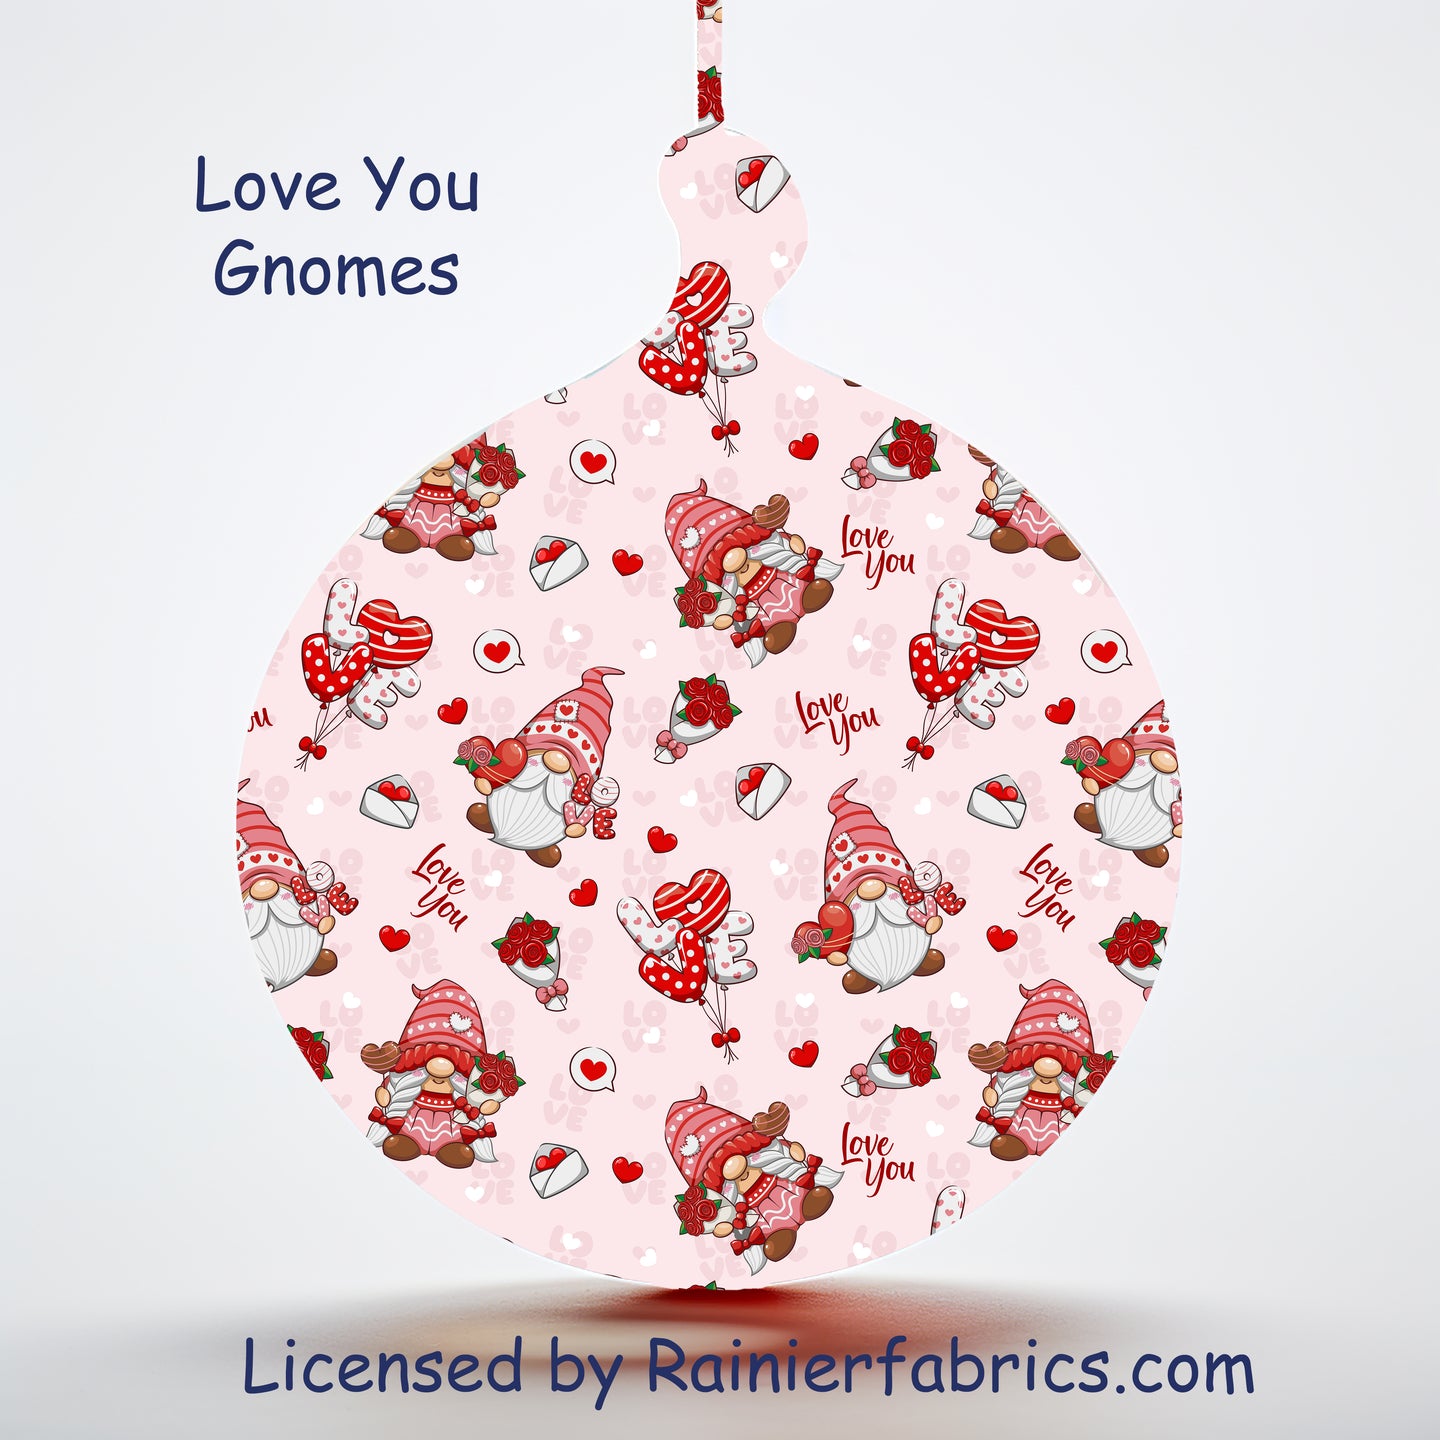 Love You Gnomes - Valentines Day is Everyday!